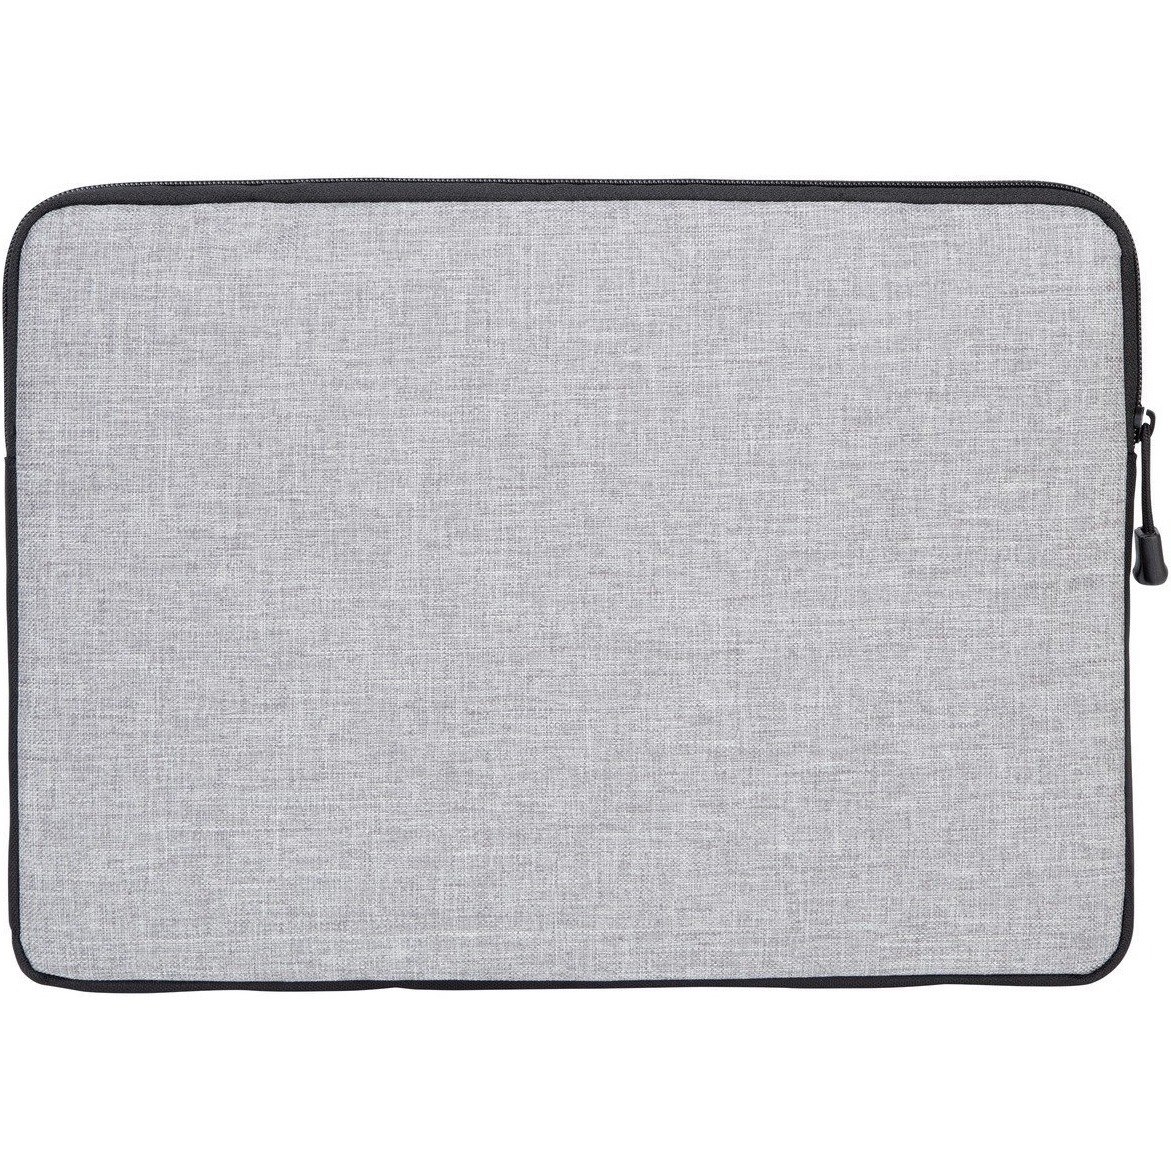 Targus Strata TSS62404US Carrying Case (Sleeve) for 13" to 13.3" Notebook - Pewter